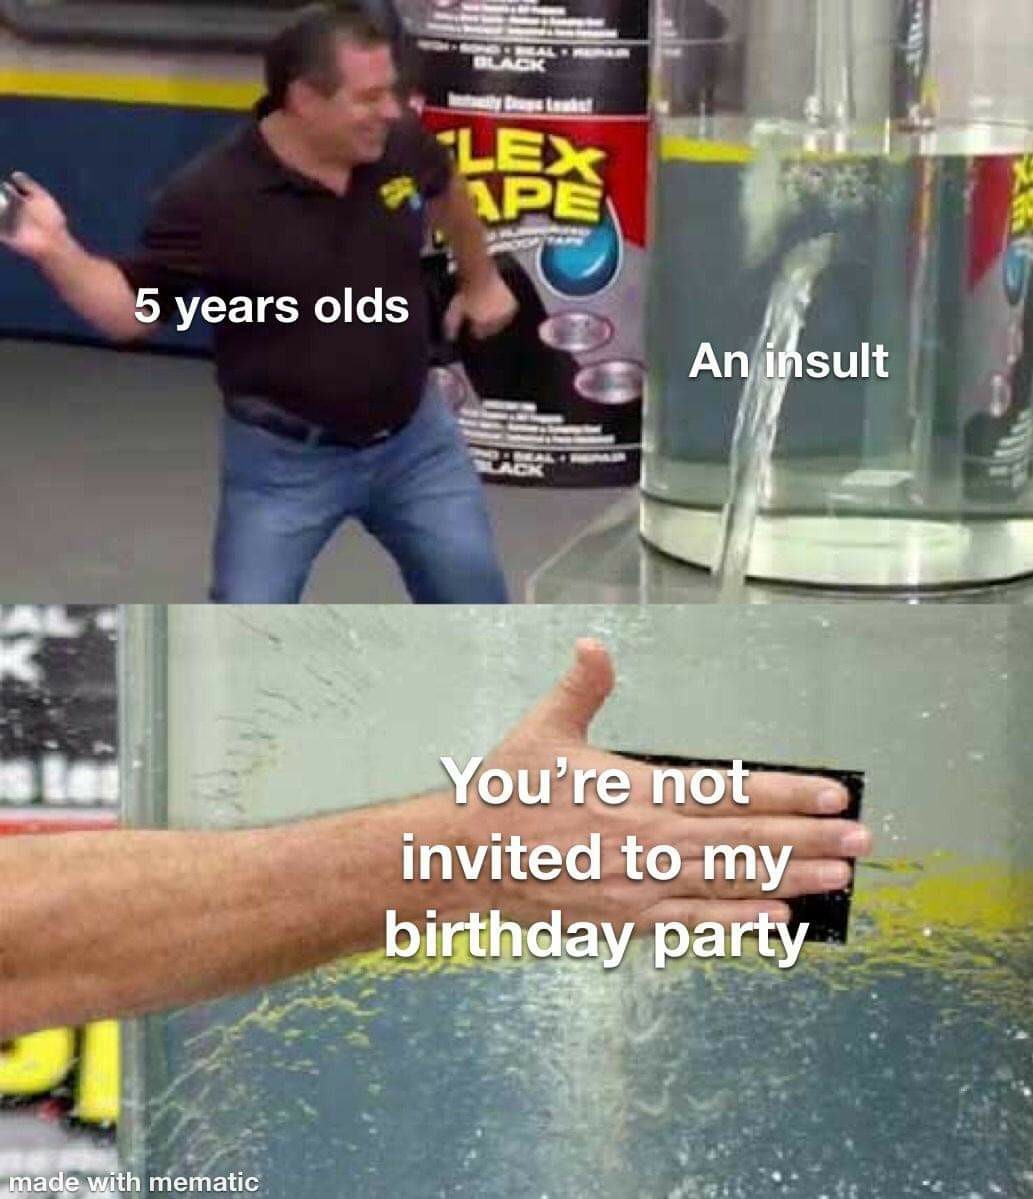 cool and funny pics - flex tape leak meme - Lex 5 years olds An insult You're not invited to my birthday party 21 made with mematic